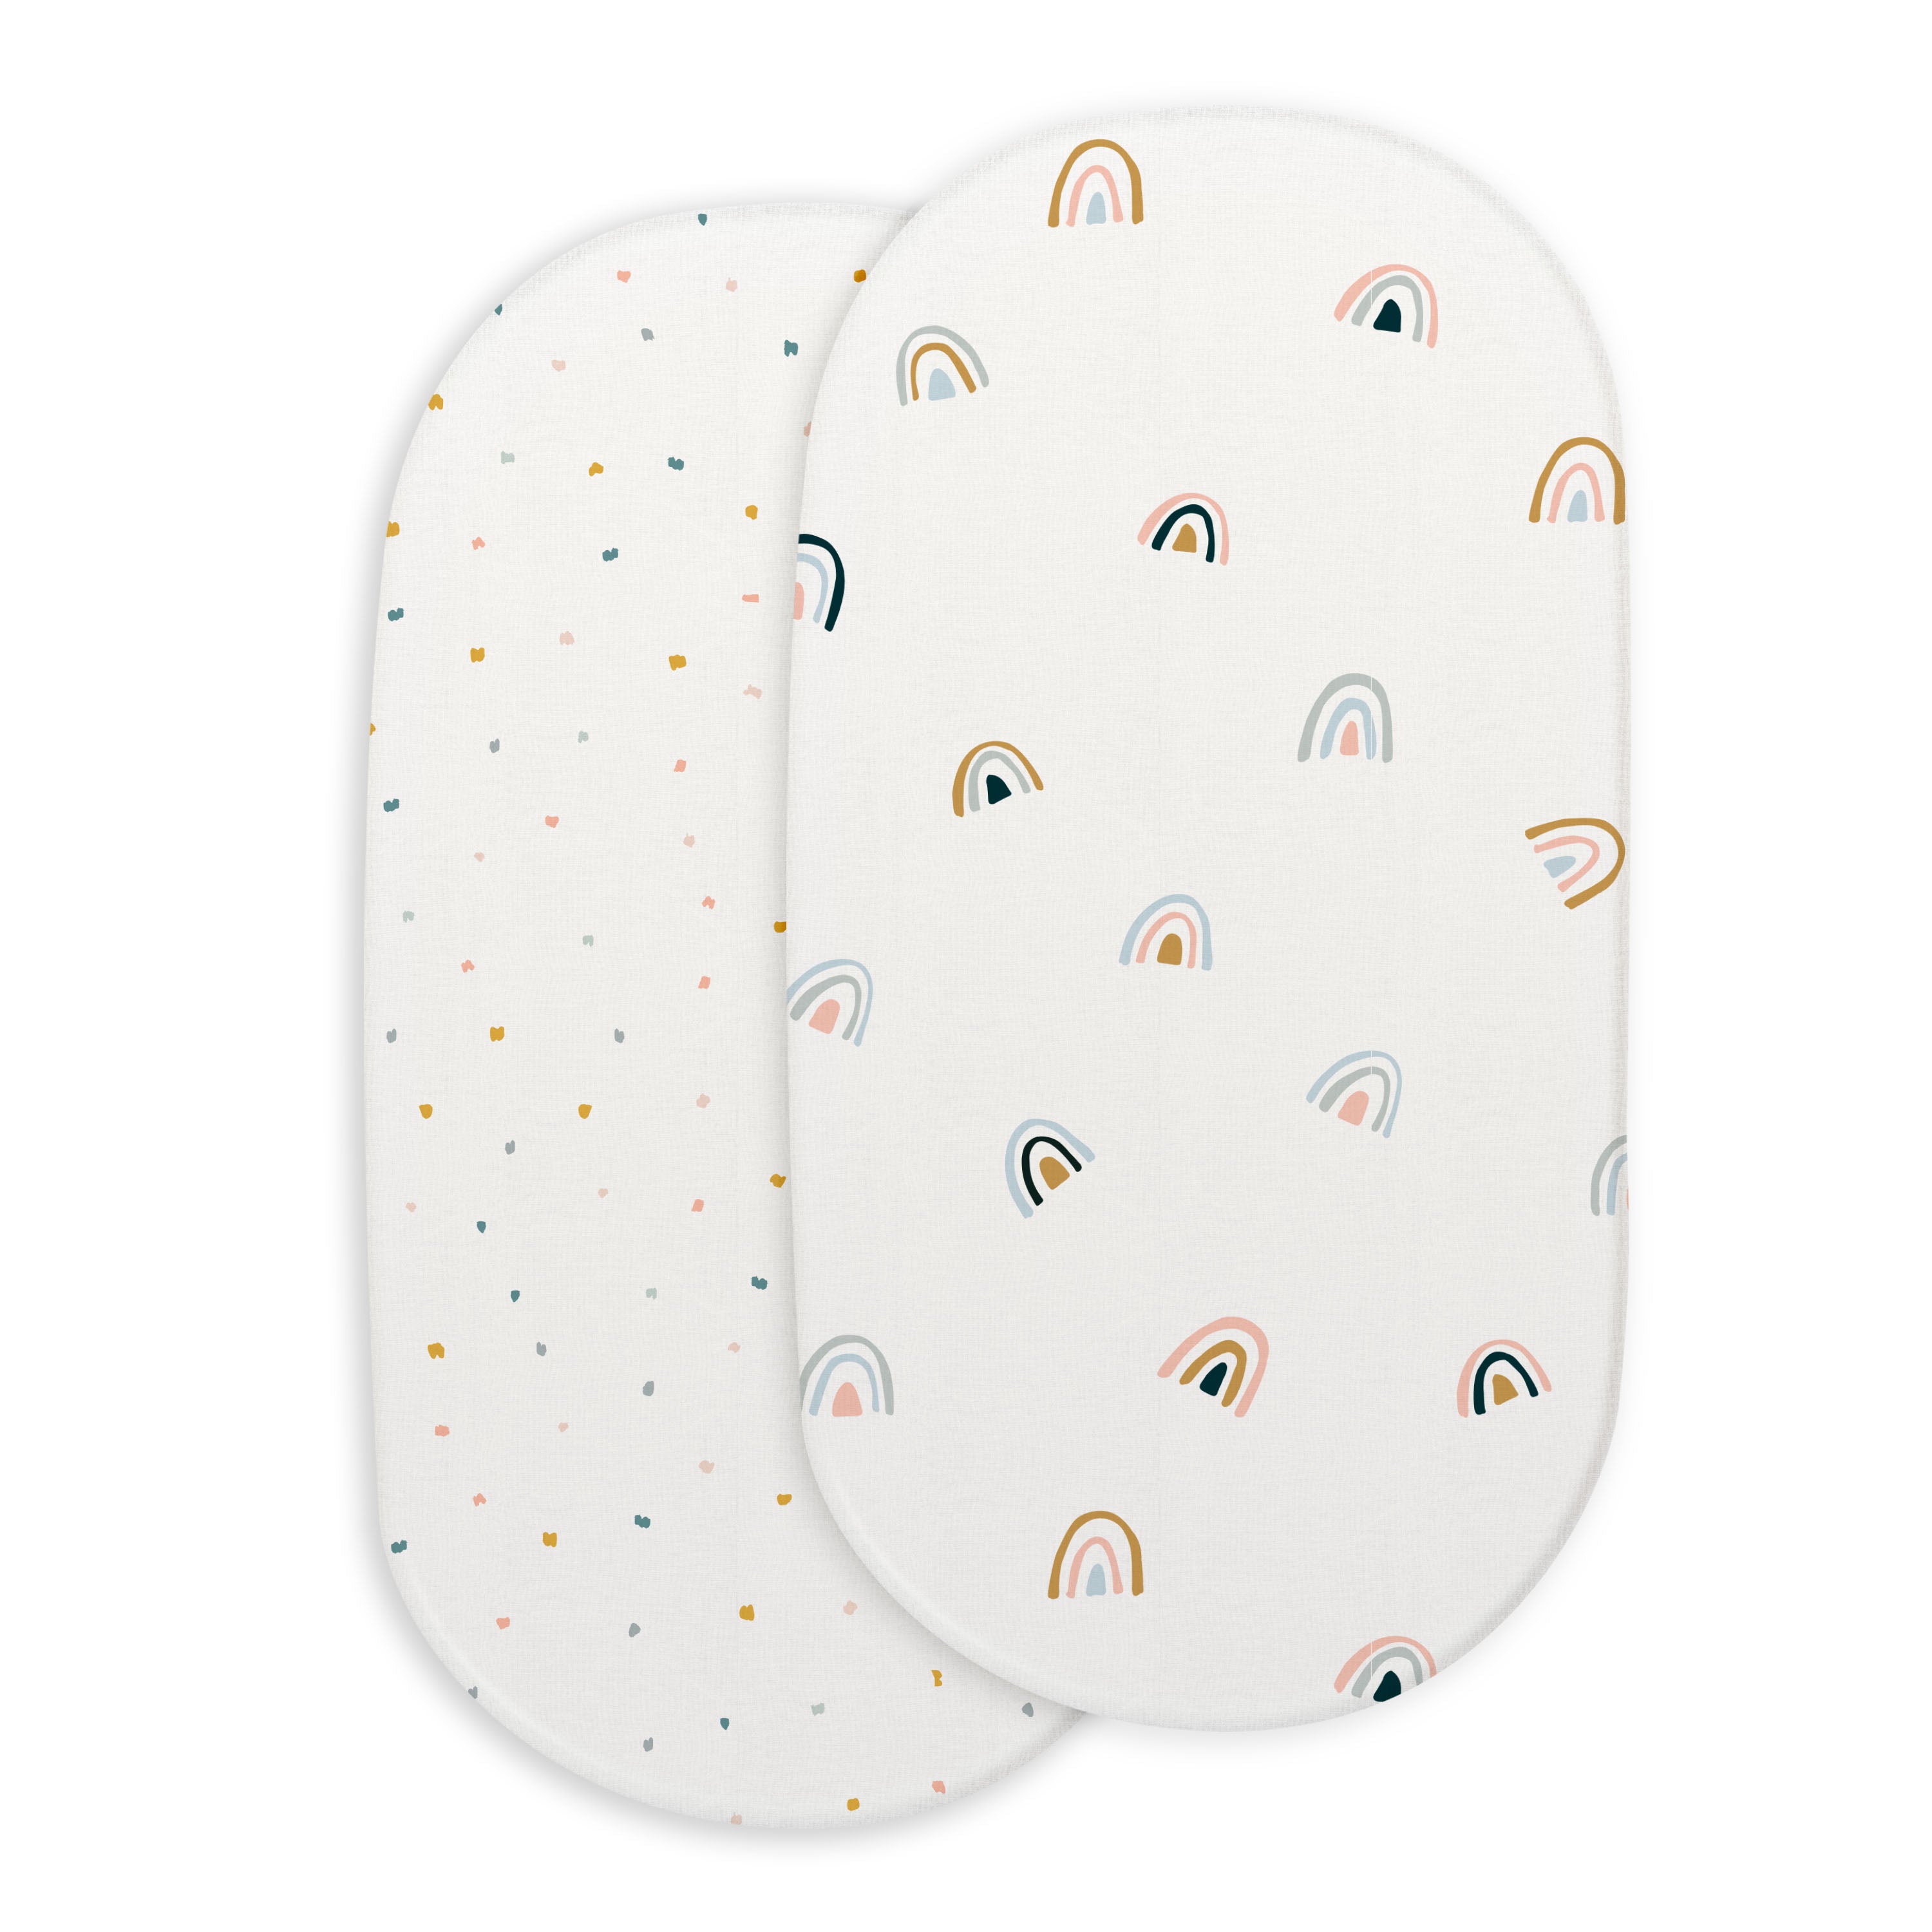 Two oval-shaped burp cloths with different patterns; one featuring multicolored rainbows on a white background, and the other with a confetti pattern of colored dots on white - Makemake Organics Bassinet Fitted Sheet - Dotty & Rainbow.